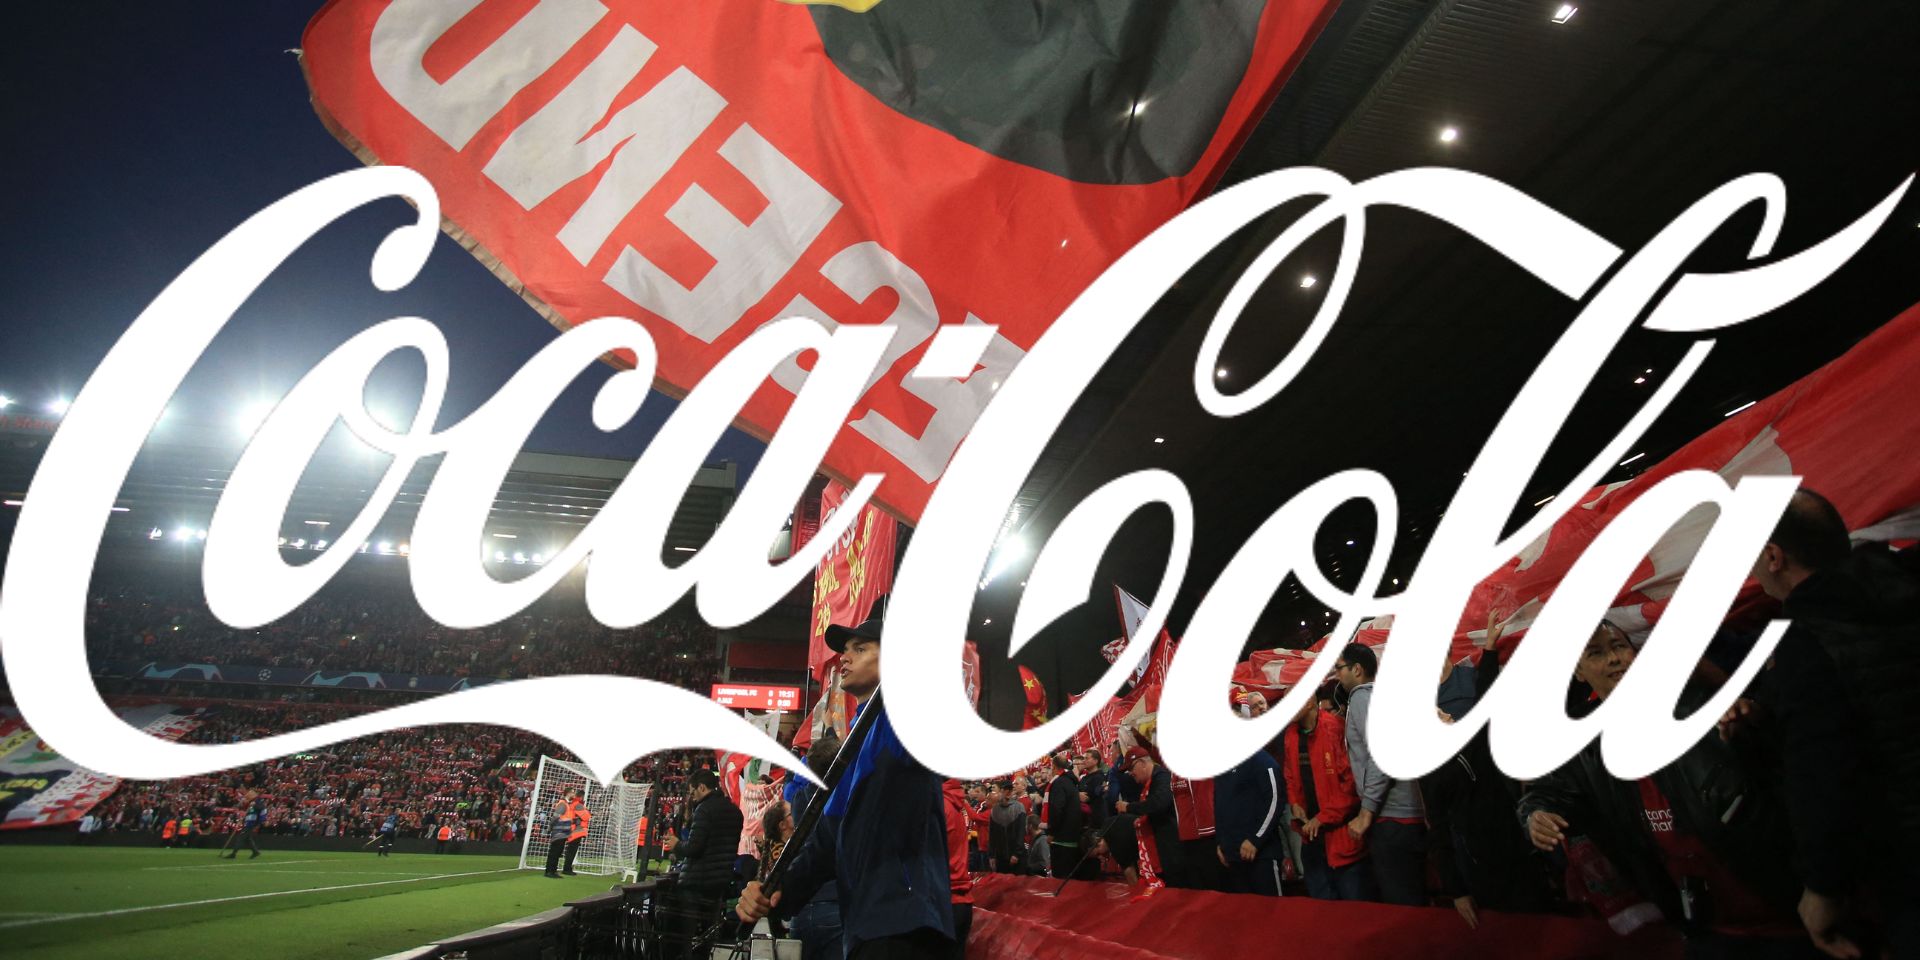 Liverpool announce ‘unique’ partnership with Coca-Cola, on the same day as Spurs announce the same deal